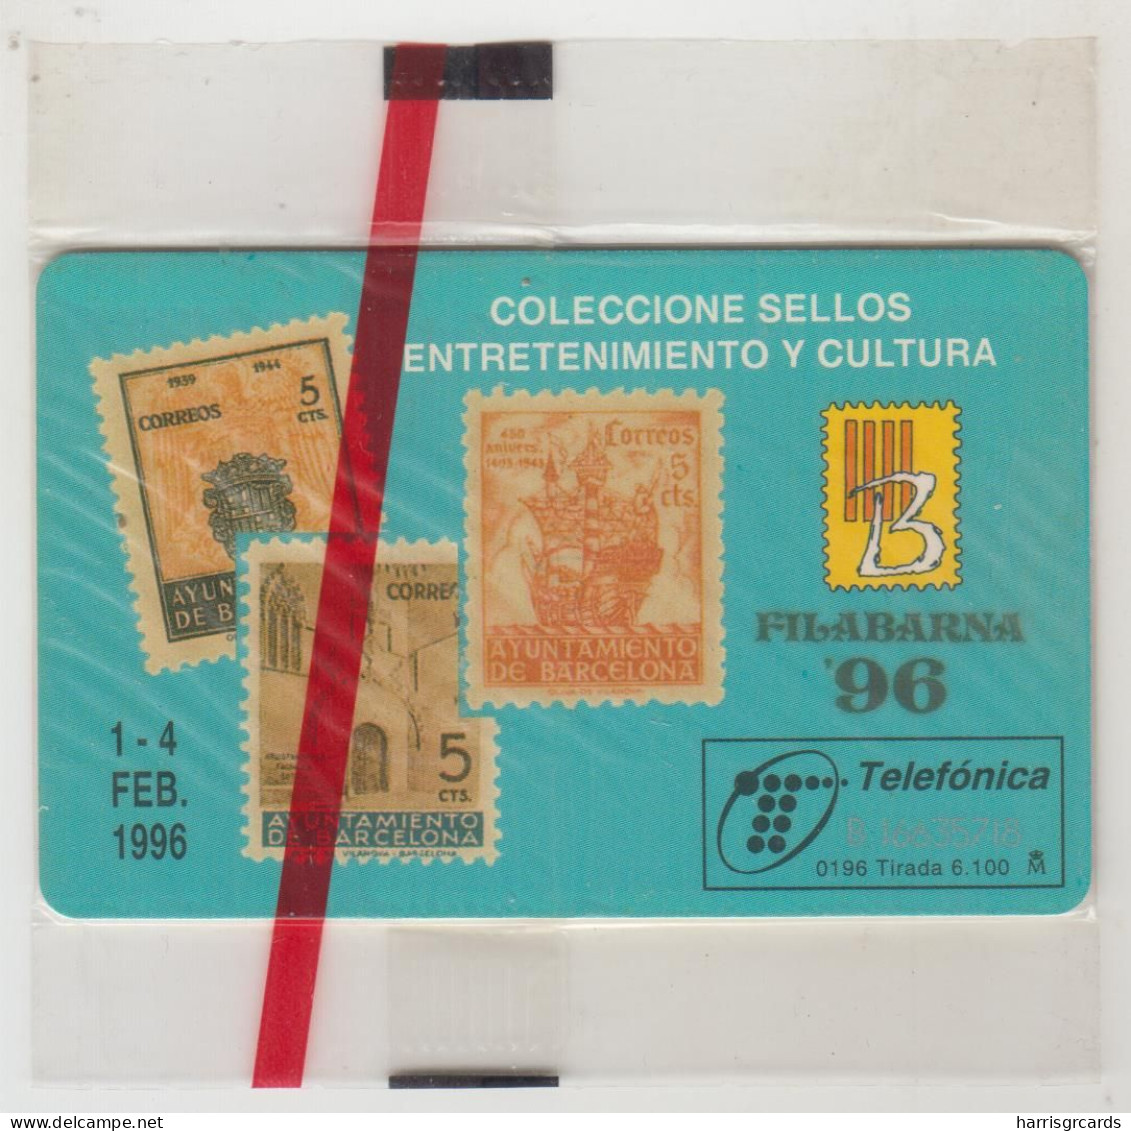 SPAIN - Filabarna'96 (Tram/Stamps), P-173, 01/96, Tirage 6.100, Mint - Private Issues